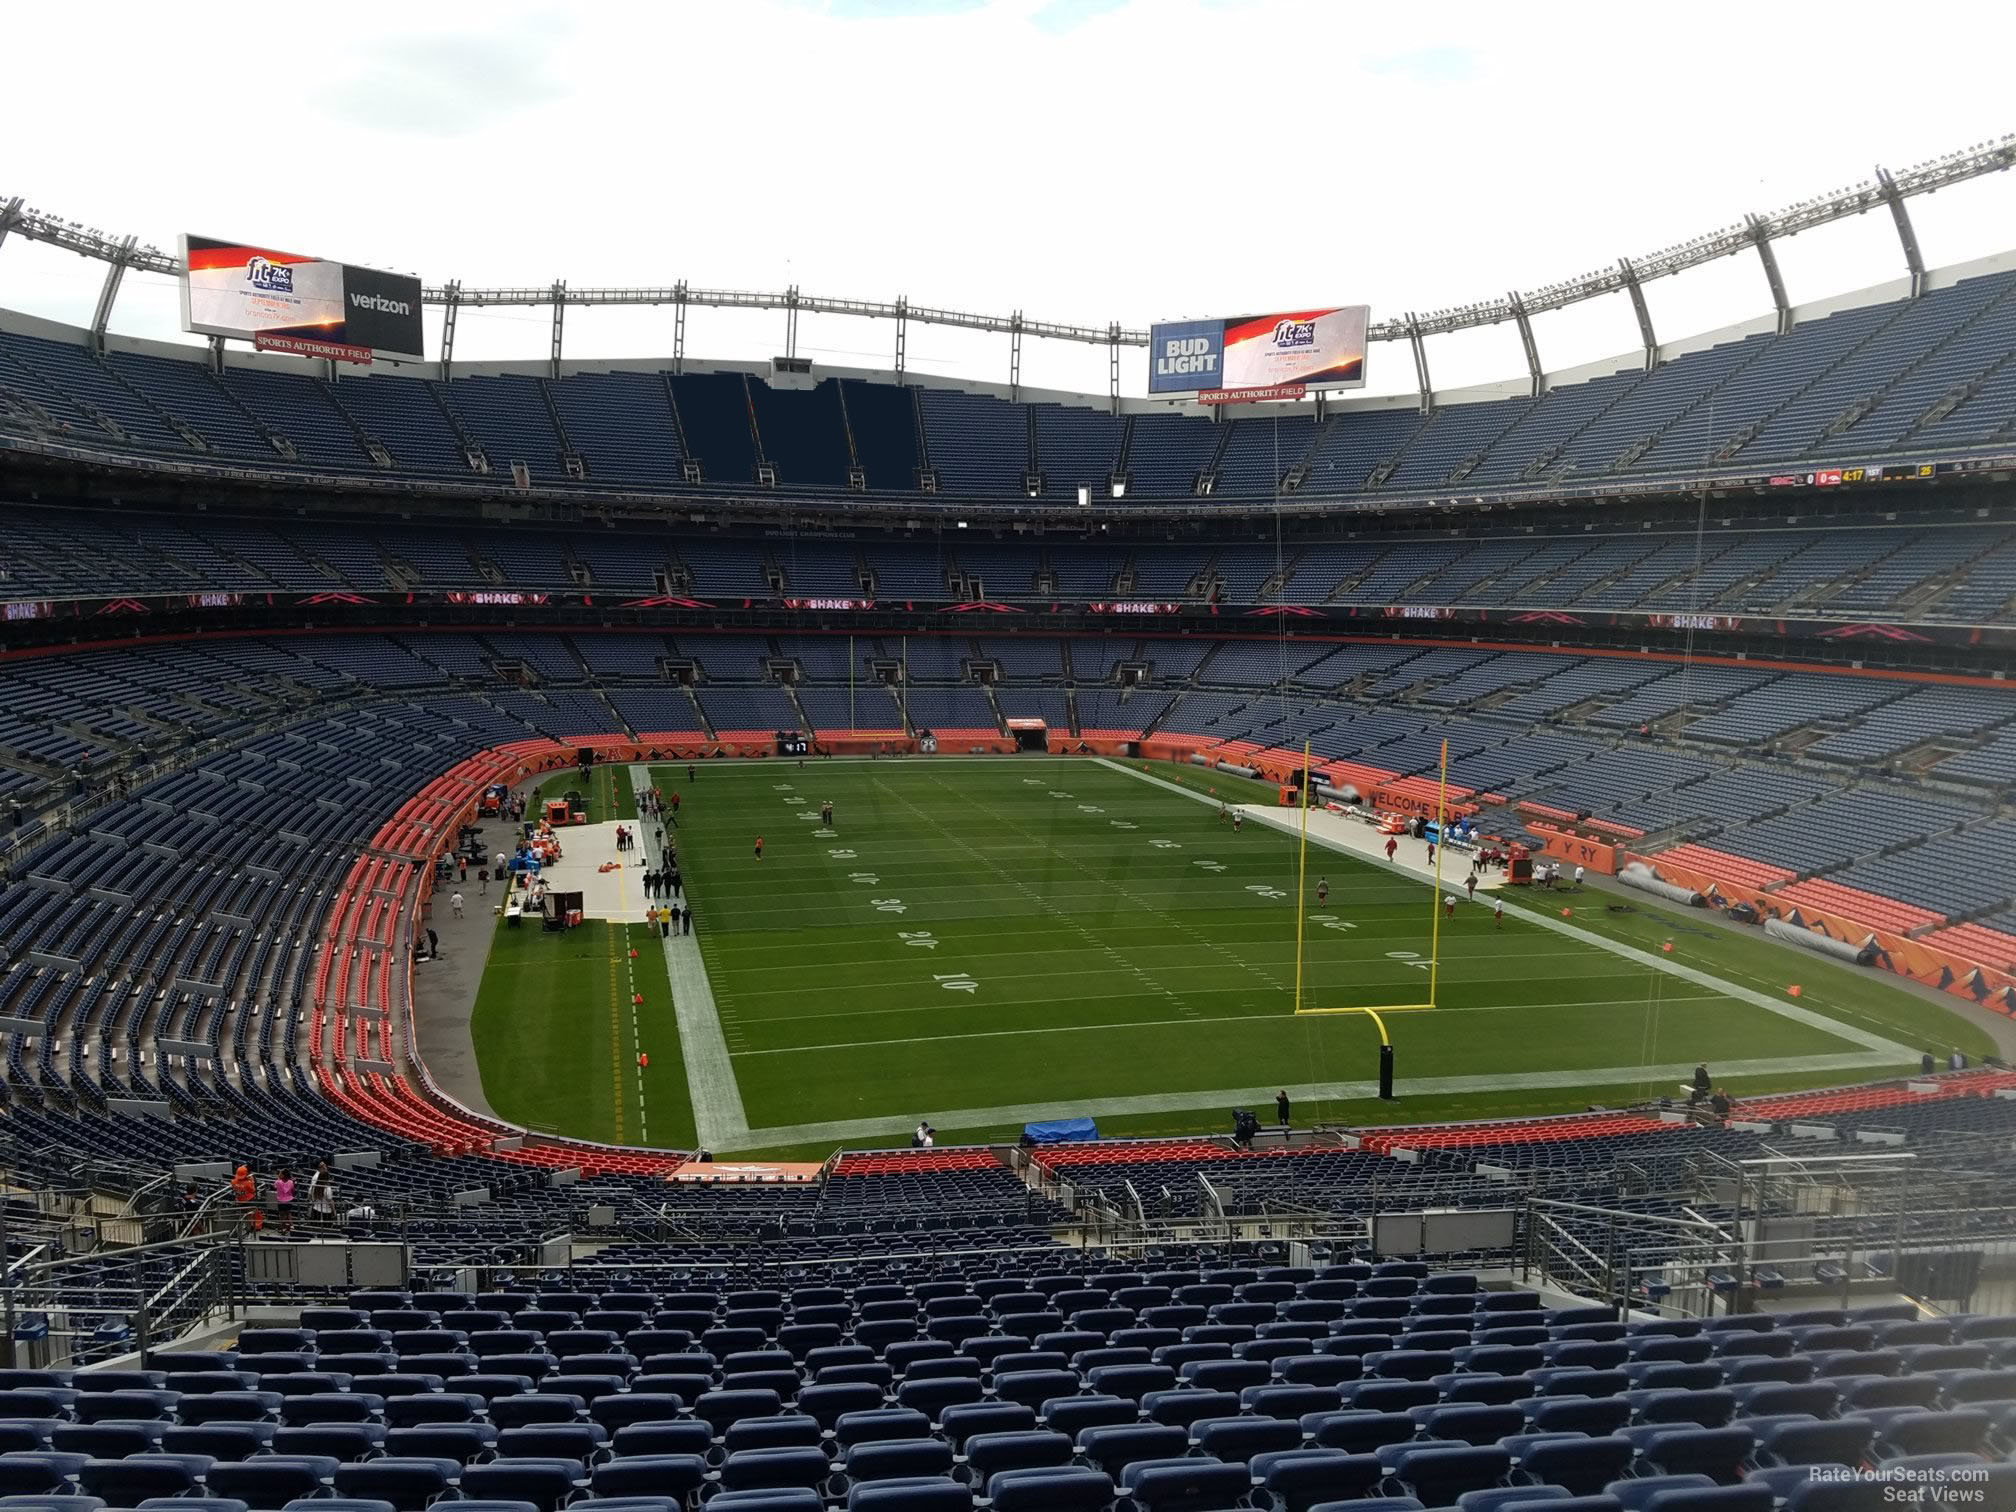 section 234, row 16 seat view  - empower field (at mile high)